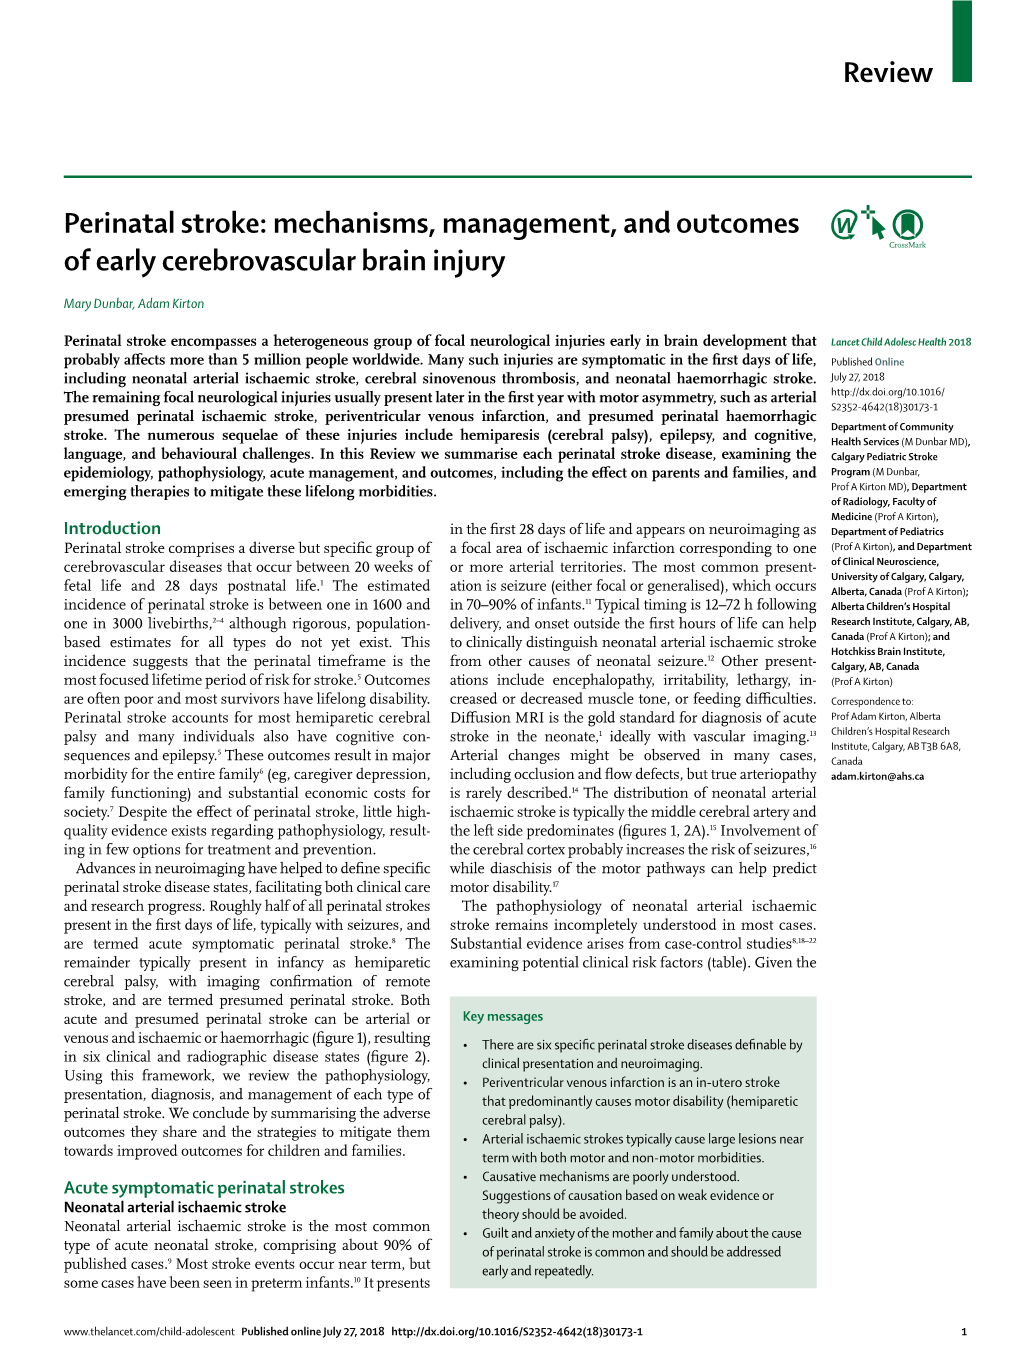 Perinatal Stroke: Mechanisms, Management, and Outcomes of Early Cerebrovascular Brain Injury